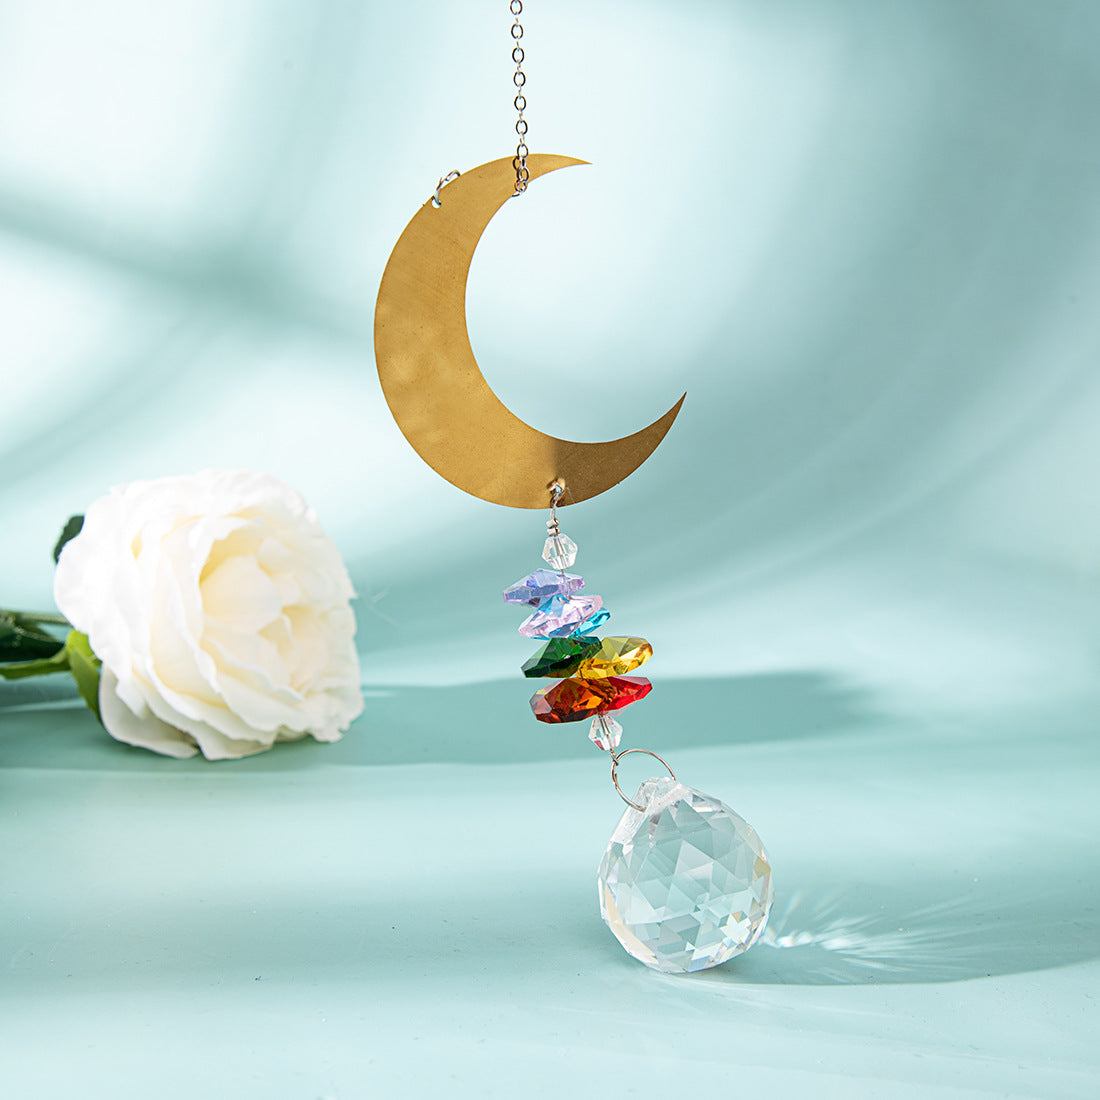 Crystal Suncatcher With Metal Art For Home Decoration